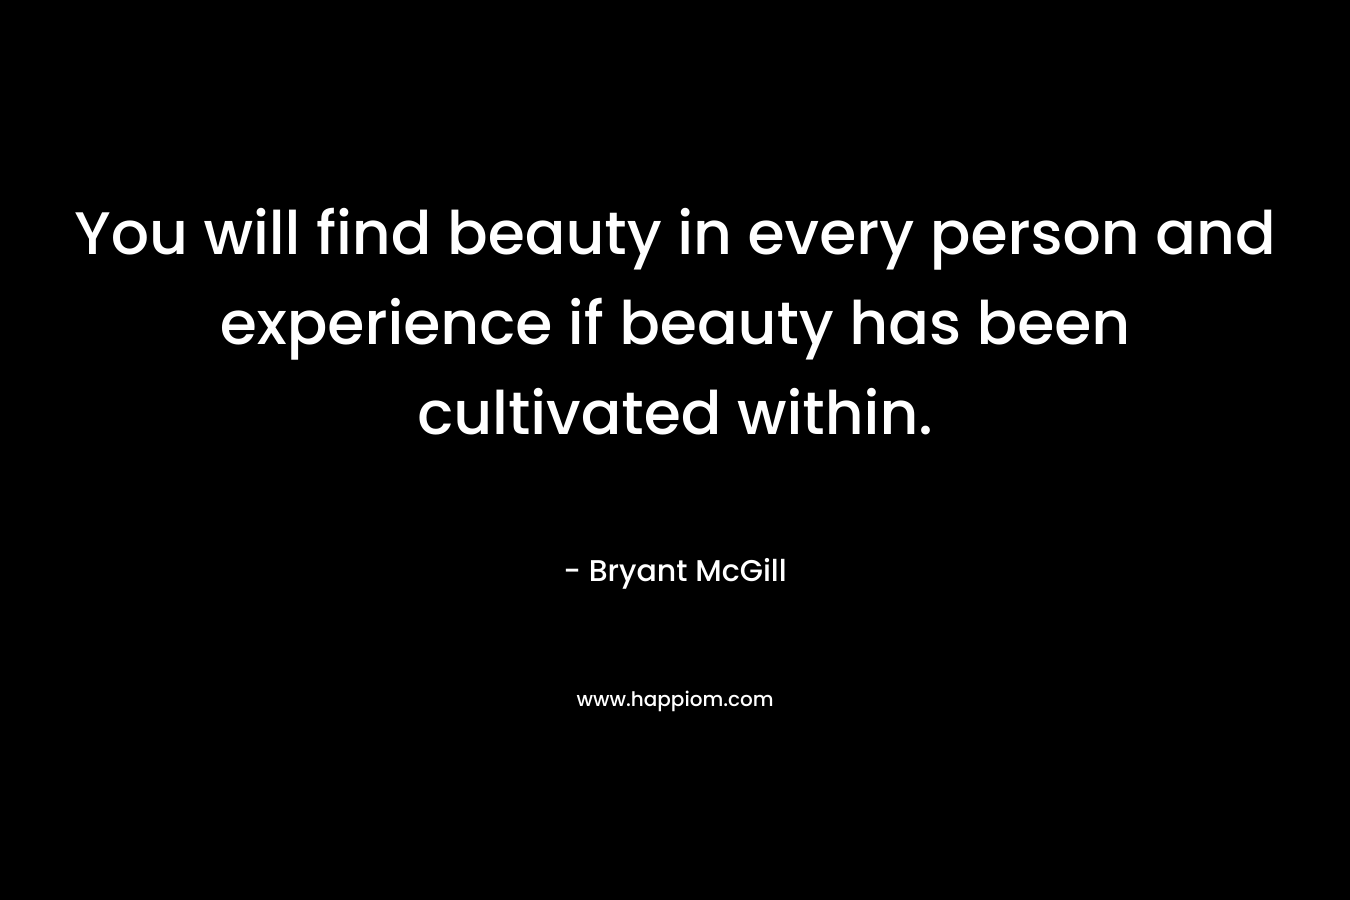 You will find beauty in every person and experience if beauty has been cultivated within.